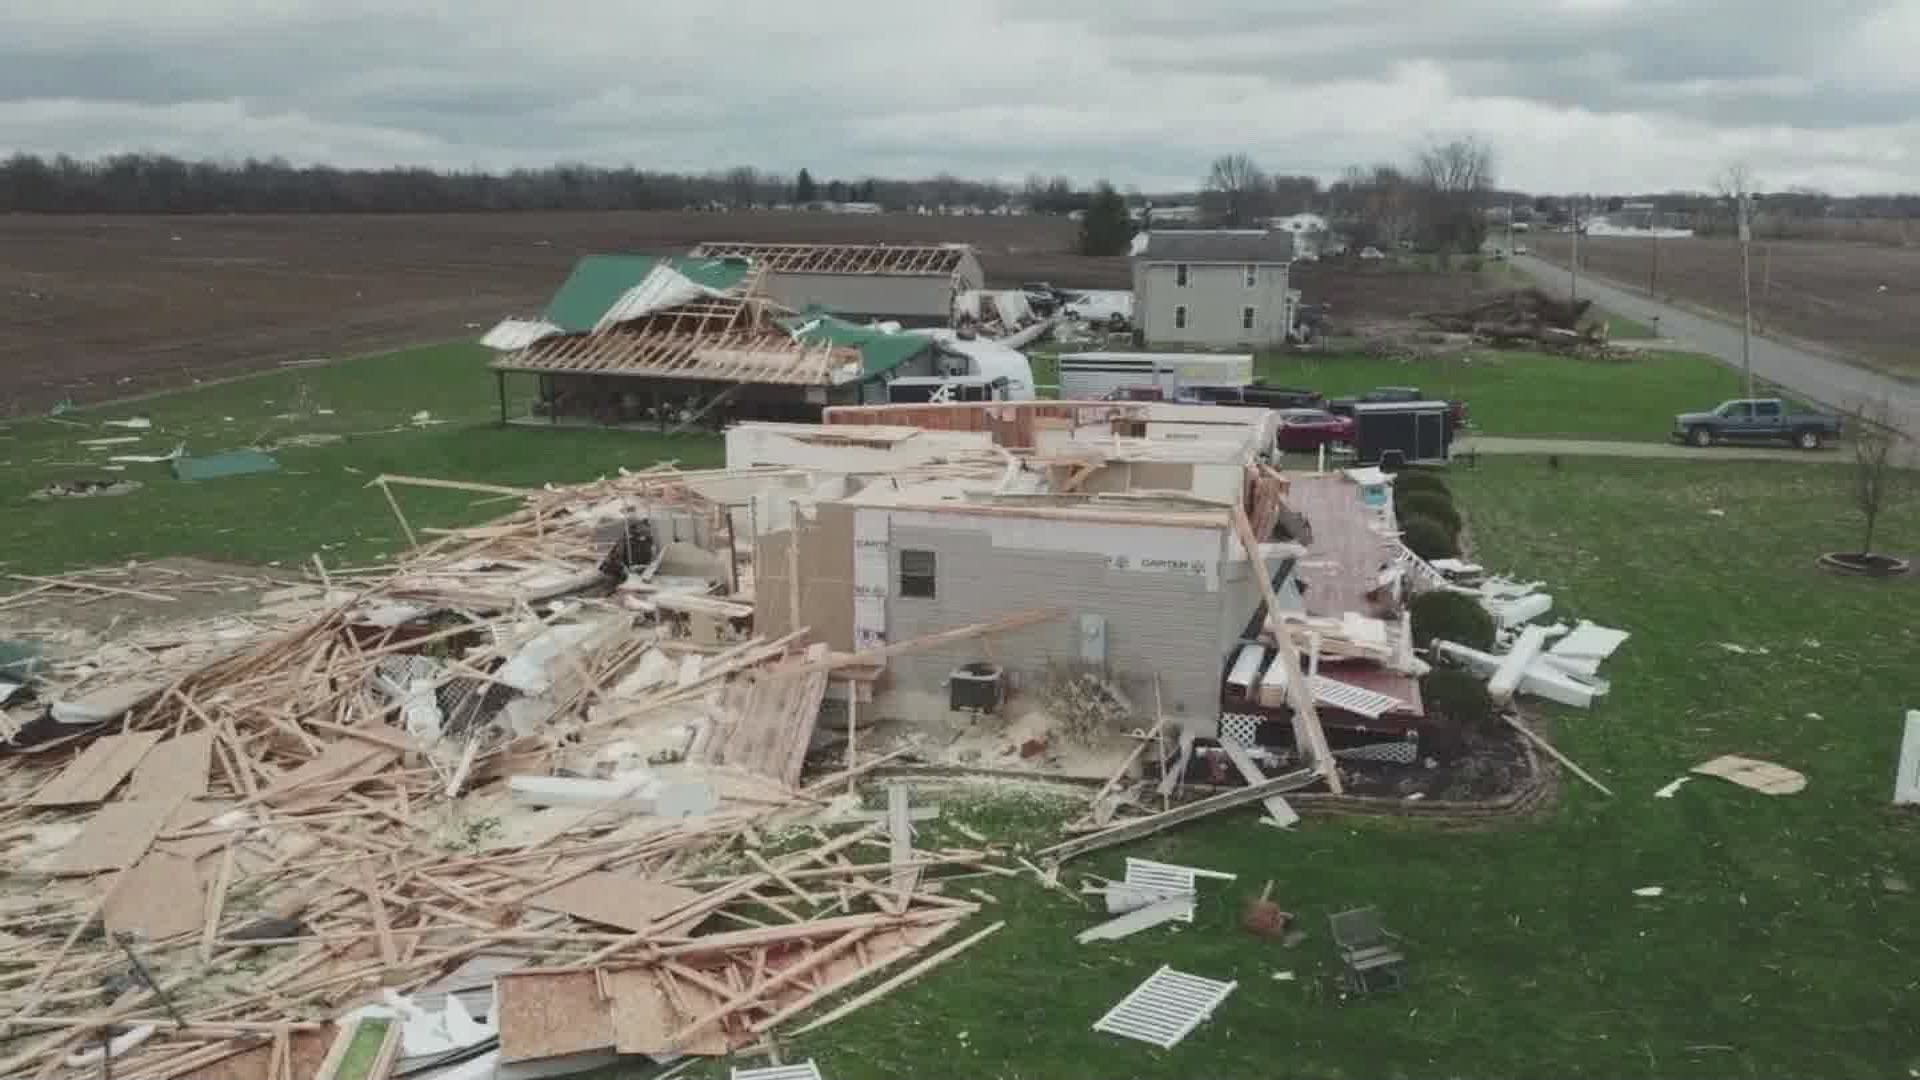 911 calls after a tornado tore through Shelby, Ohio on April 14.